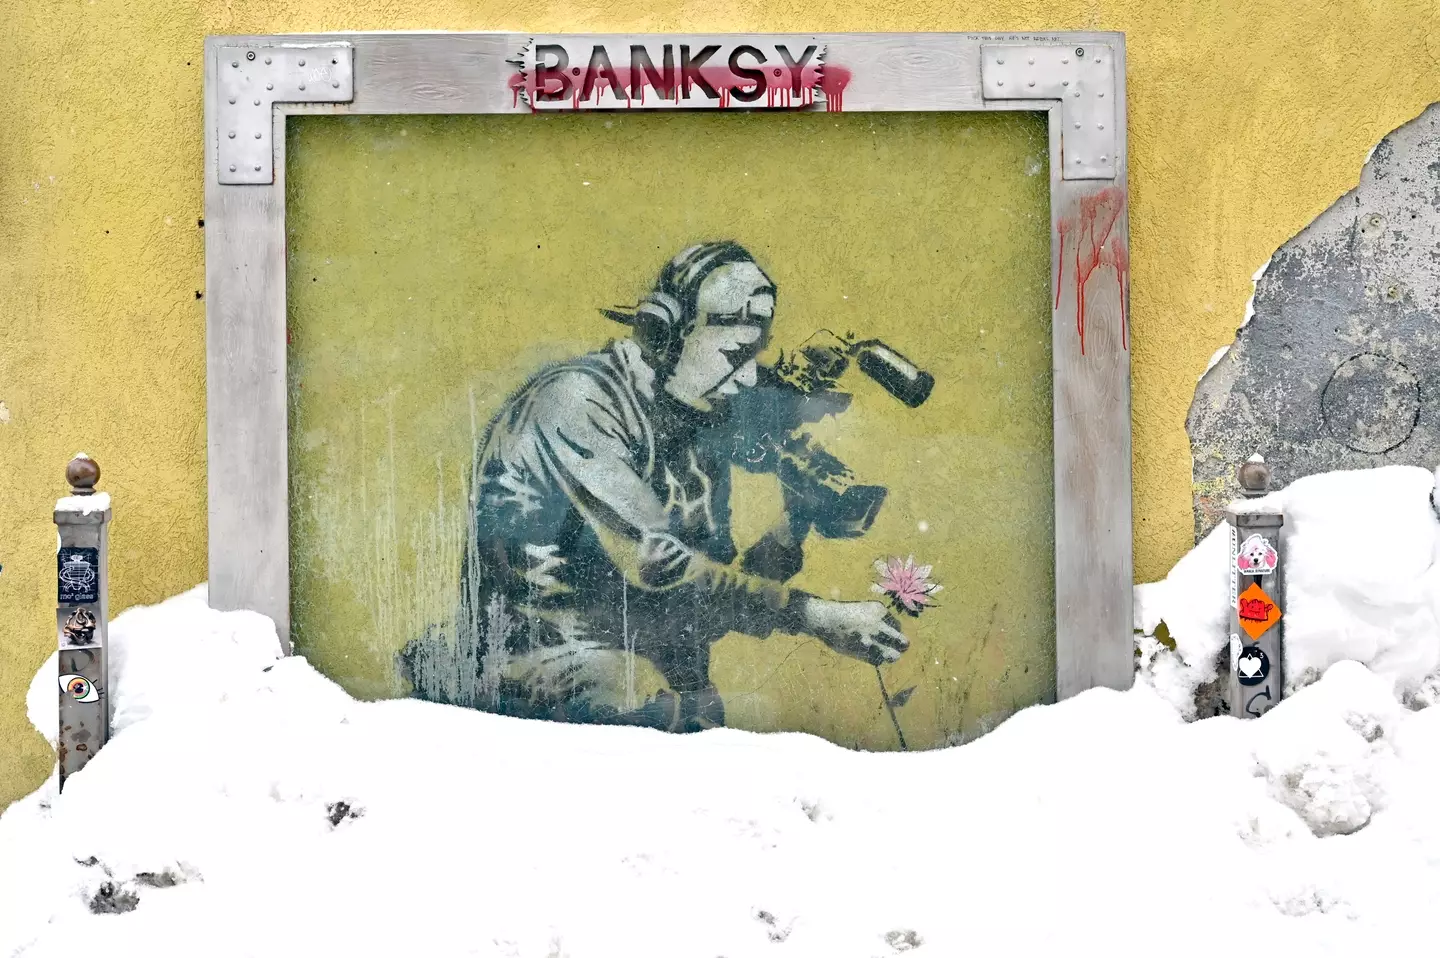 Banksy's paintings adorn walls around the world.